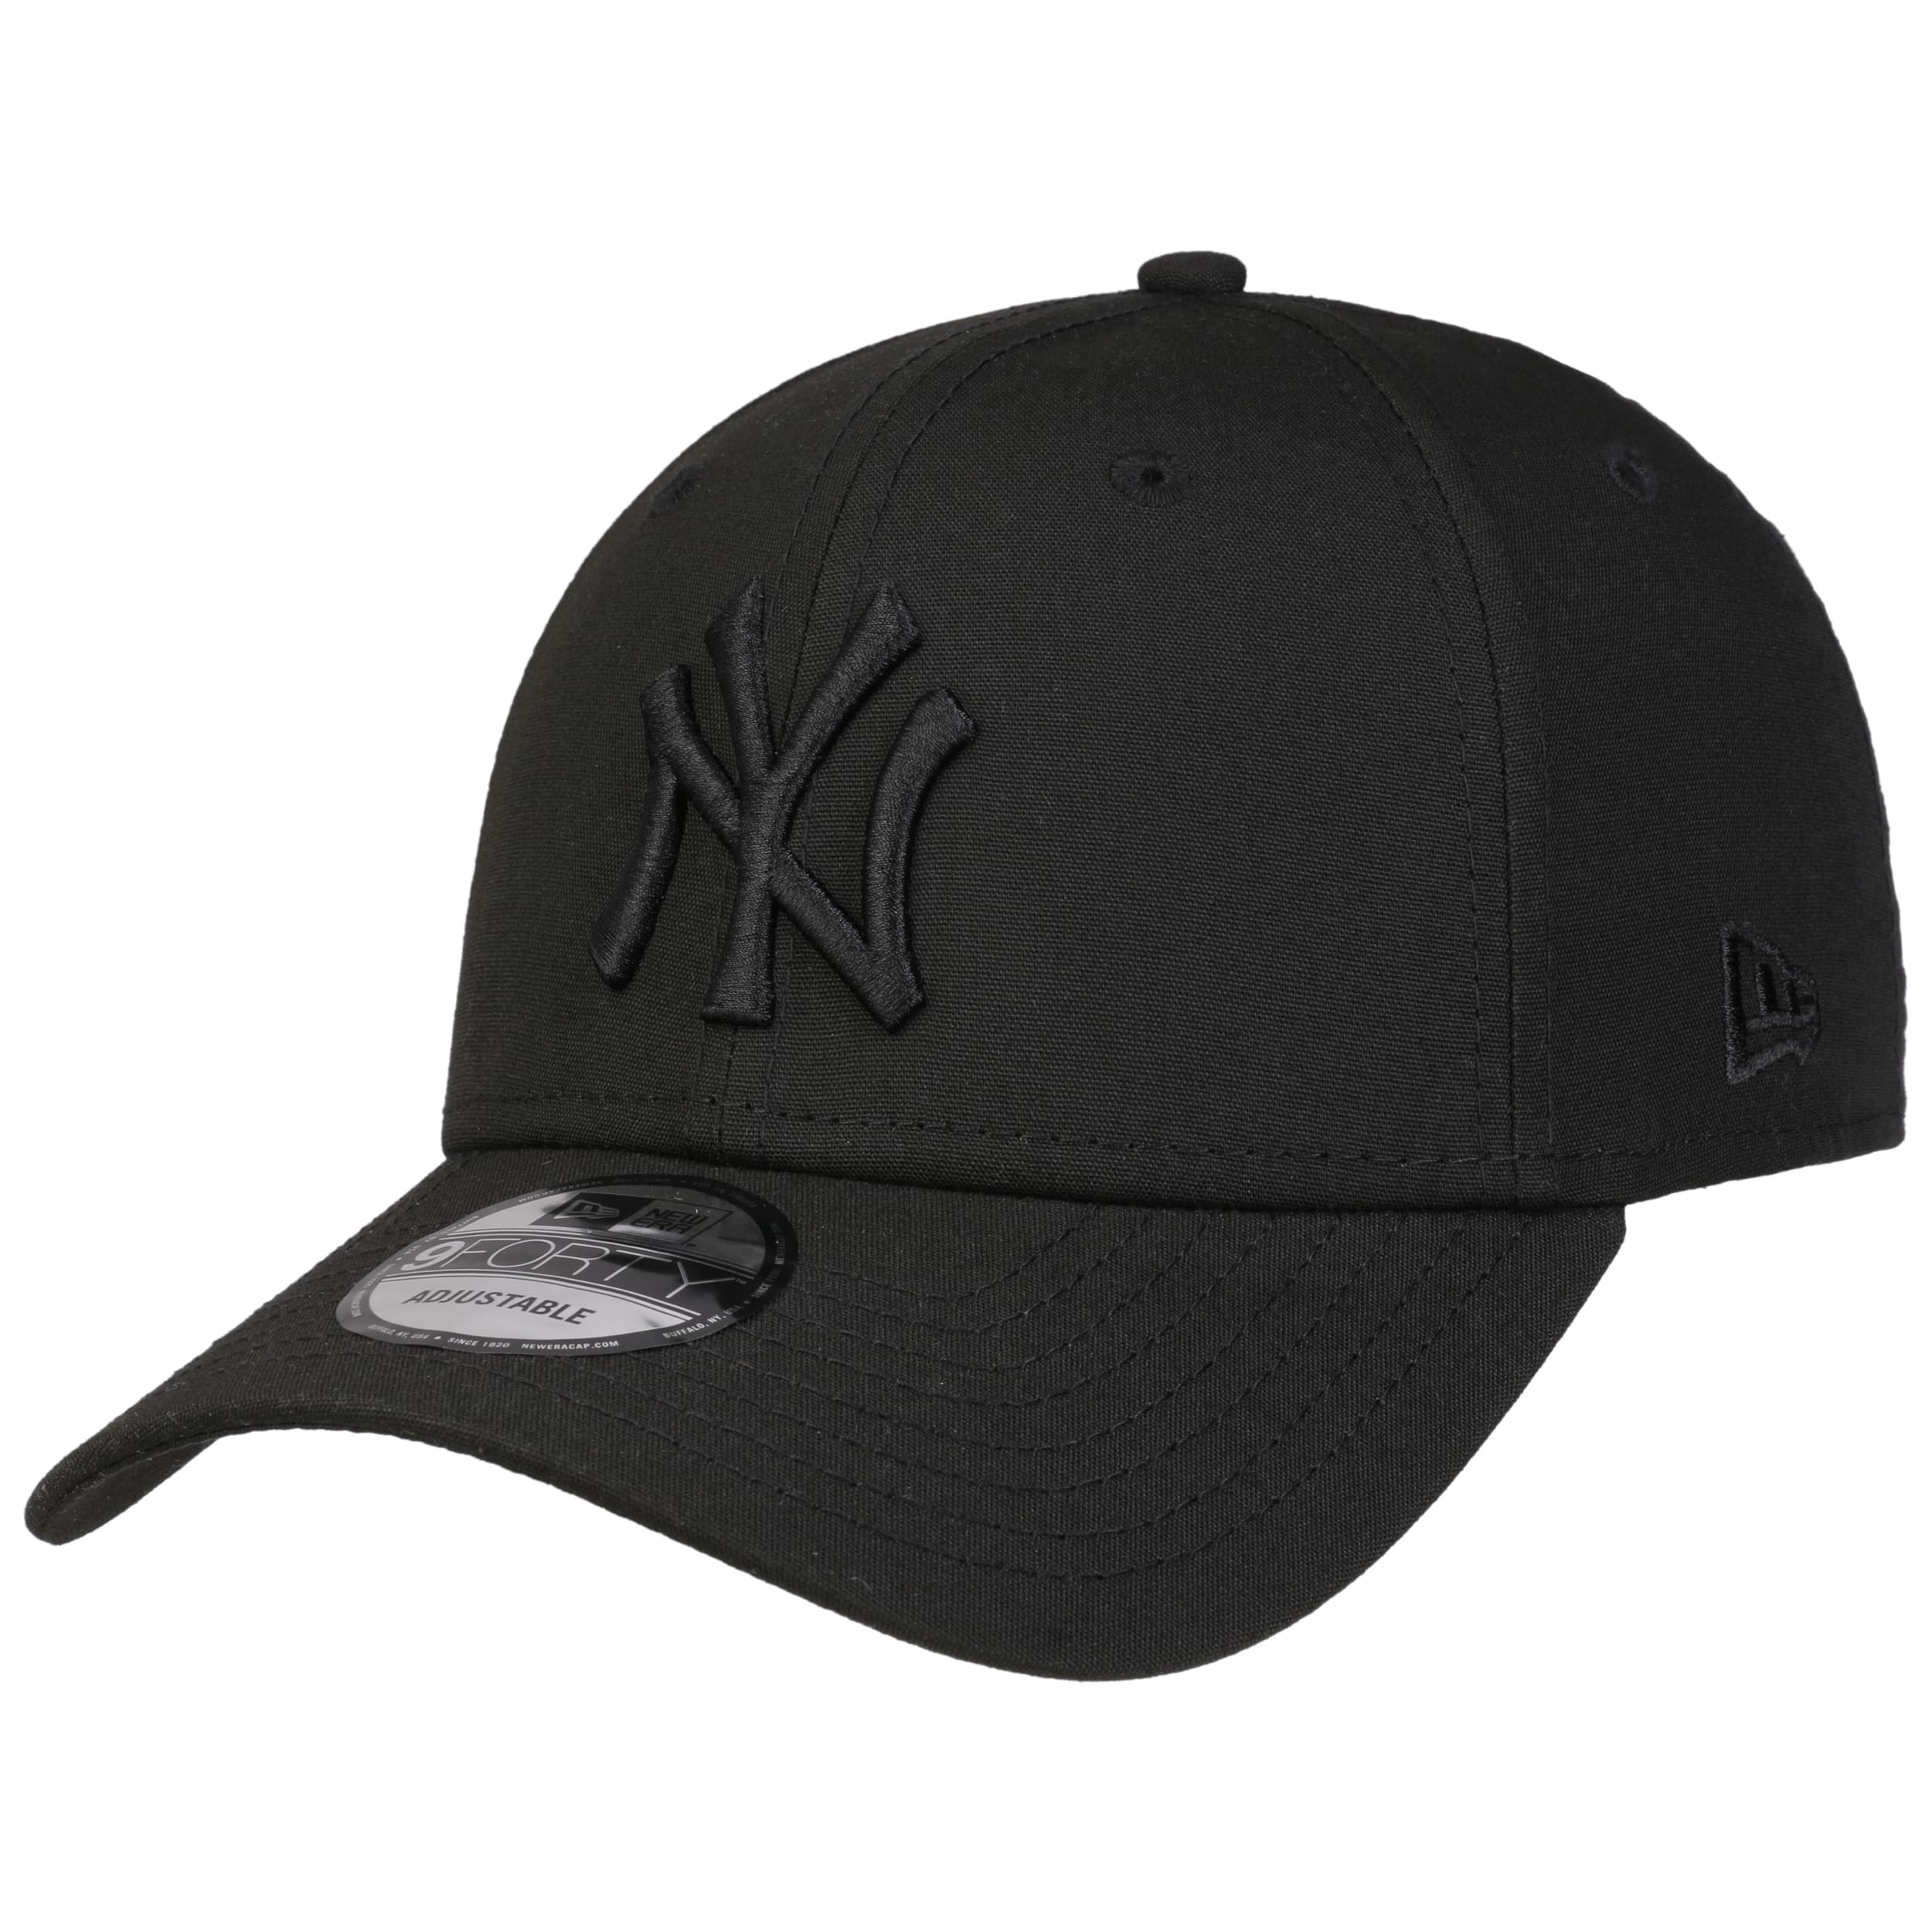 Casquettes - New Era New York Yankees 9FORTY (noir)